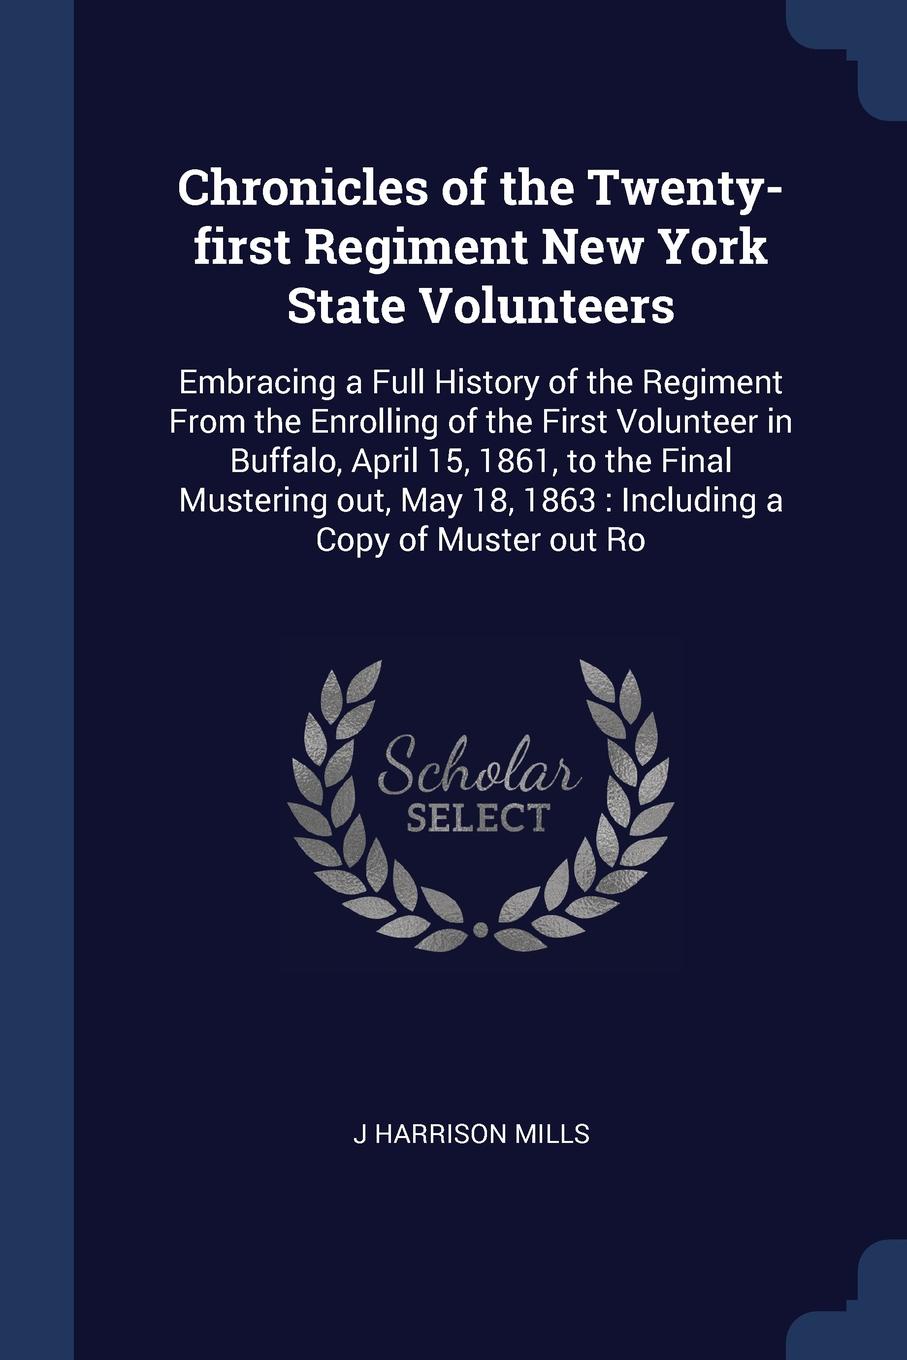 Chronicles of the Twenty-first Regiment New York State Volunteers. Embracing a Full History of the Regiment From the Enrolling of the First Volunteer in Buffalo, April 15, 1861, to the Final Mustering out, May 18, 1863 : Including a Copy of Muster...